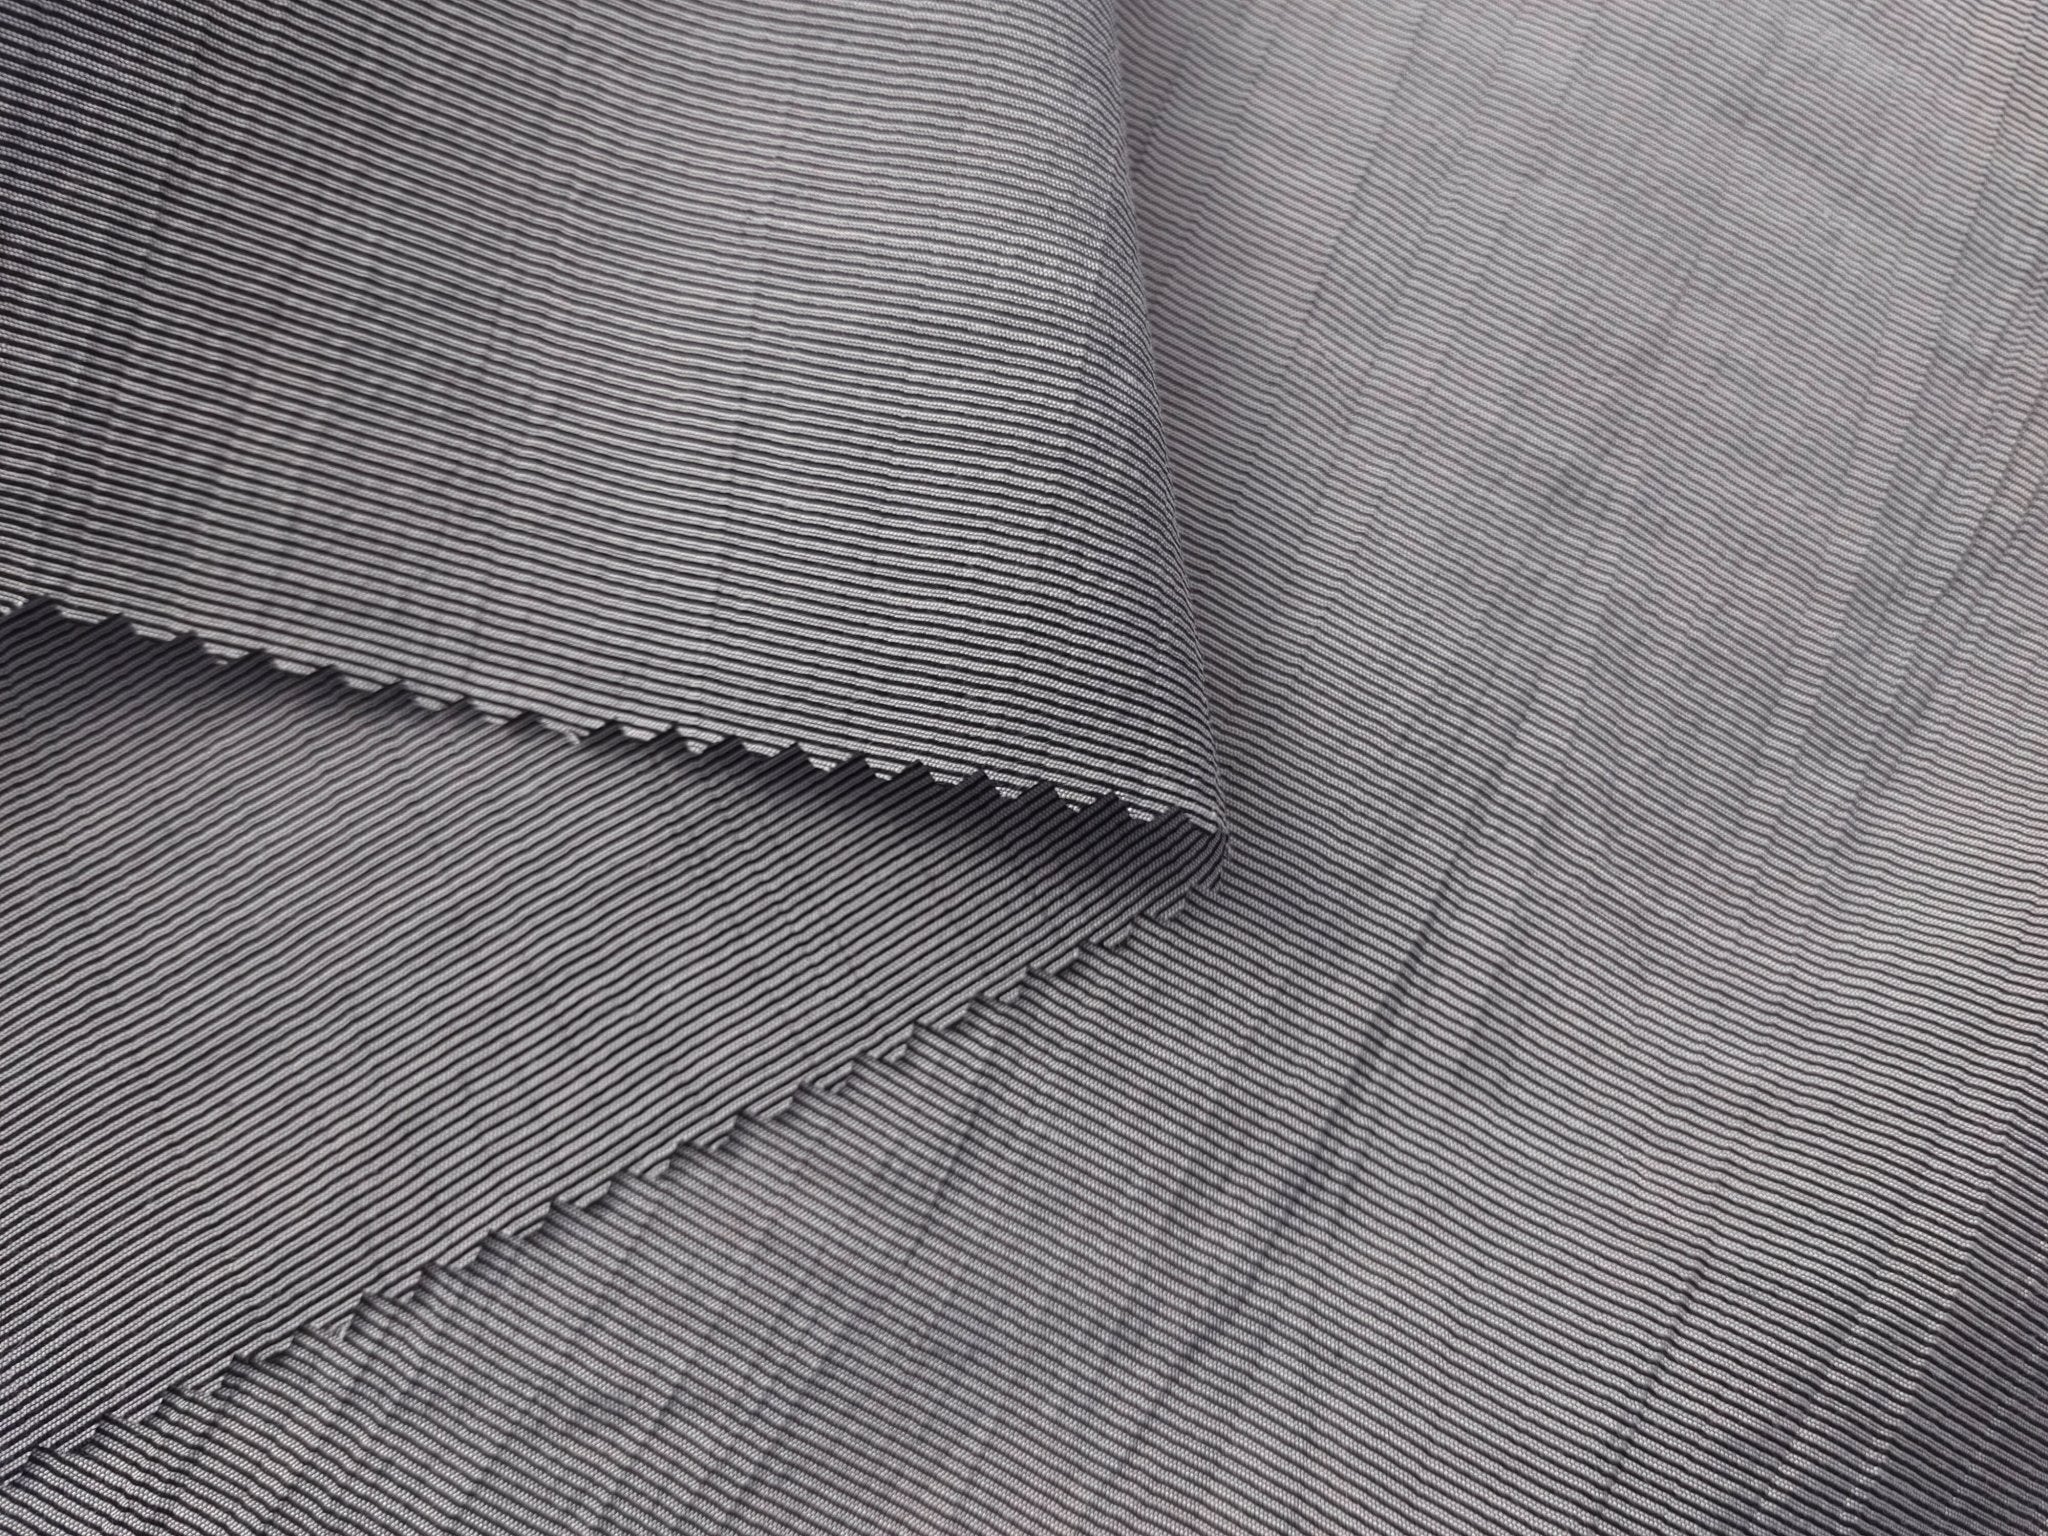 Bamboo mixed fabric with crease effect 4055 - The Linen Lab - Gray